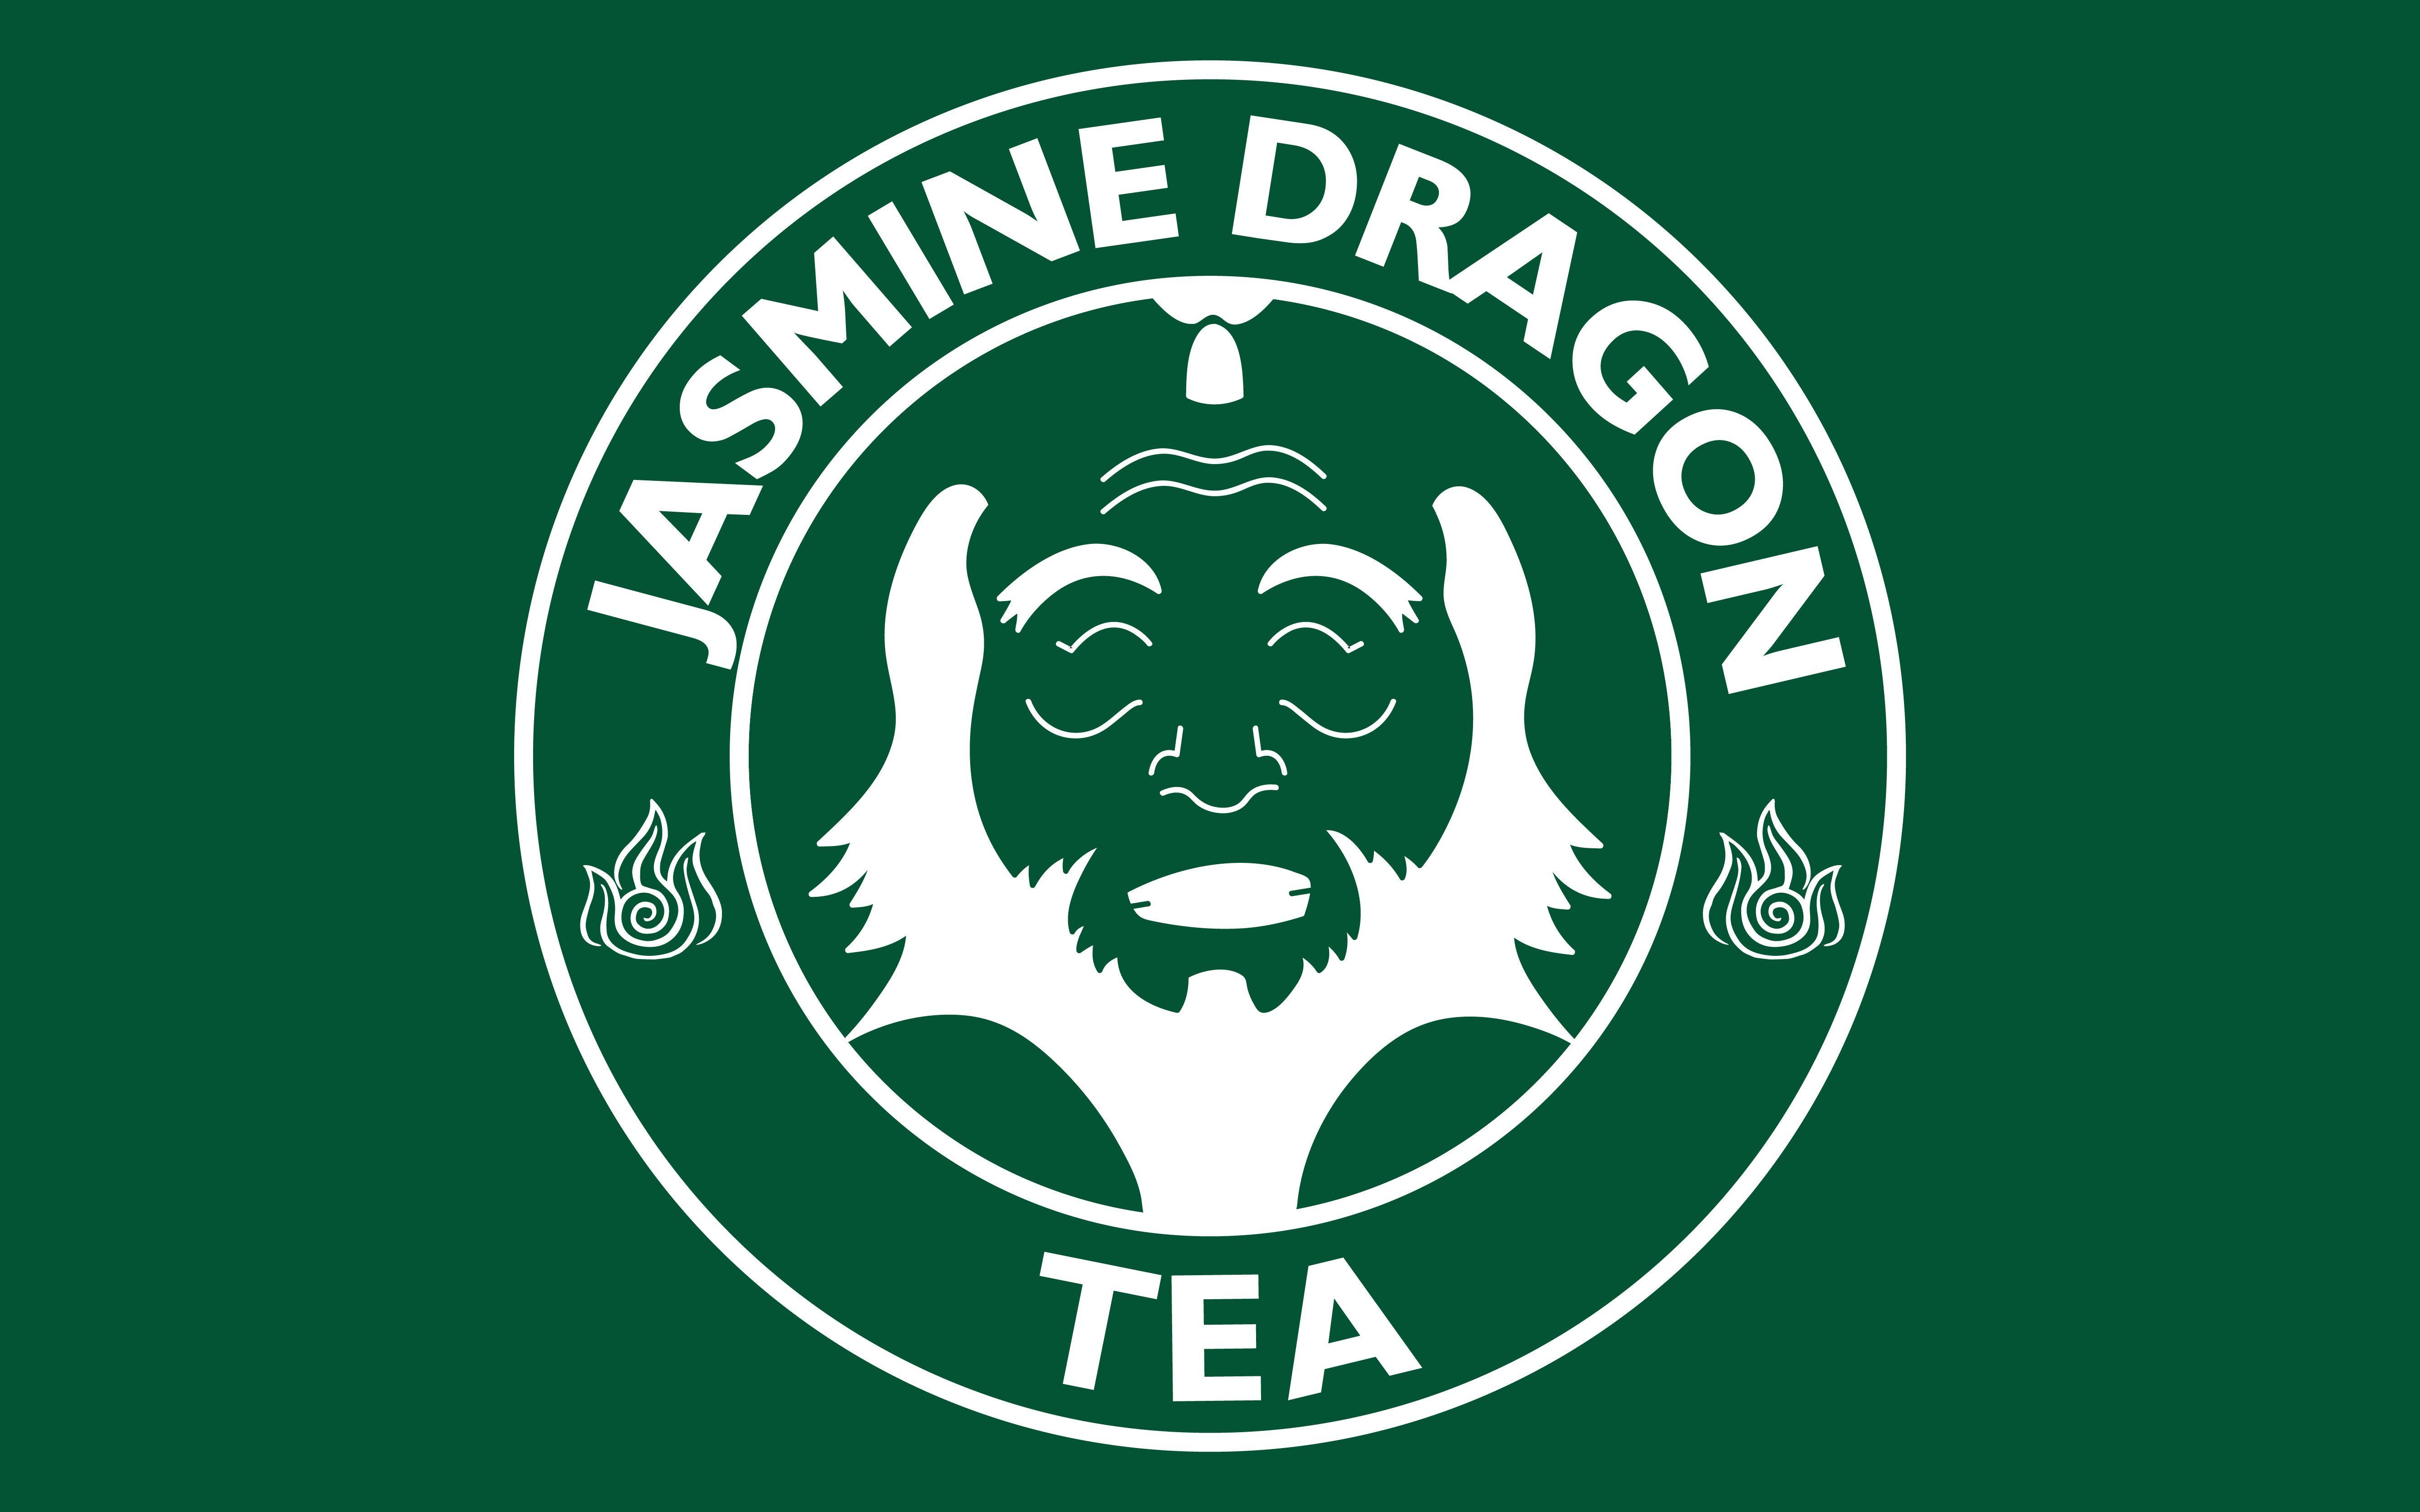 Uncle Iroh's Jasmine Dragon Tea (X Post From R SourceFed)